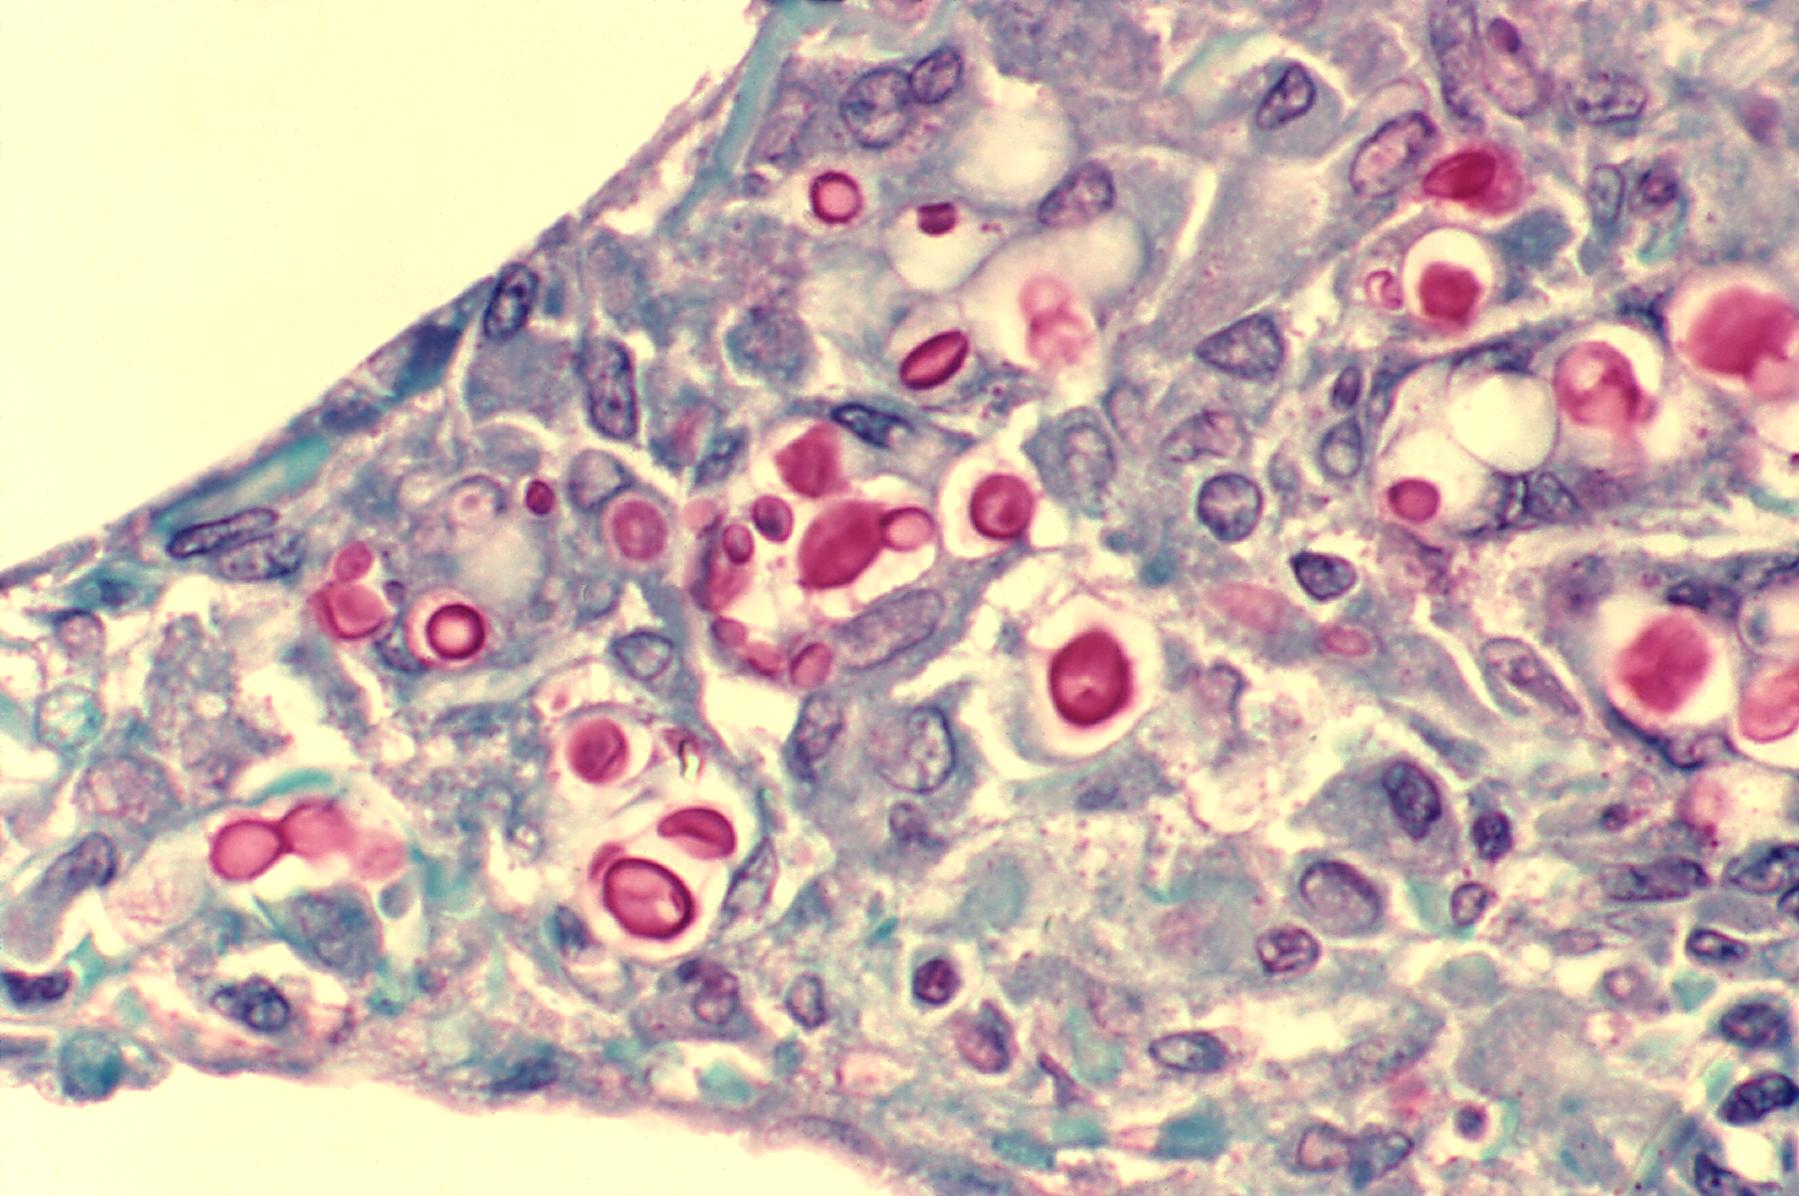 File:Cryptococcosis of lung in patient with AIDS Mucicarmine stain.jpg